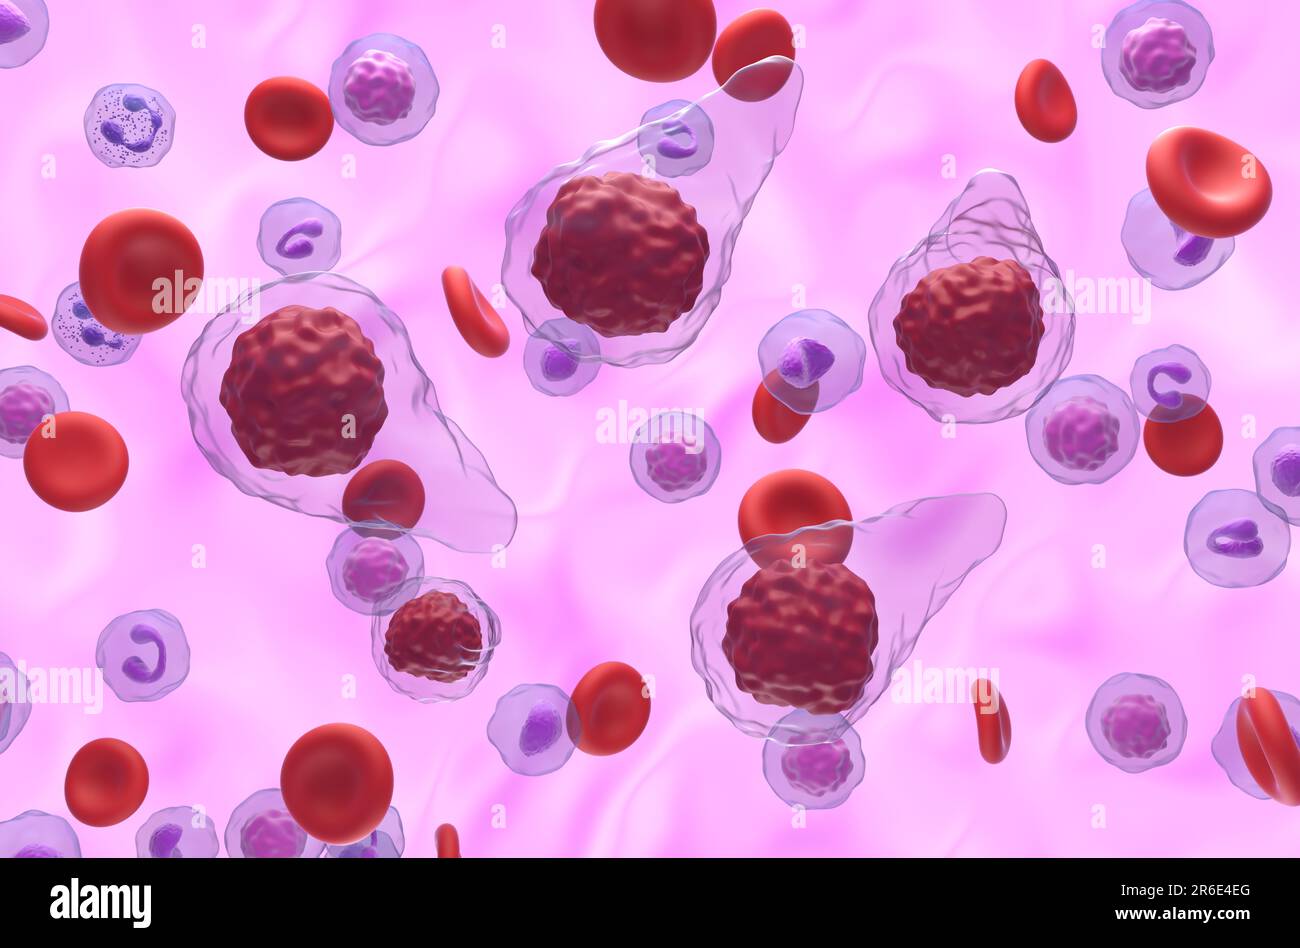 Primary myelofibrosis (PMF) cells in blood flow - isometric view 3d illustration Stock Photo